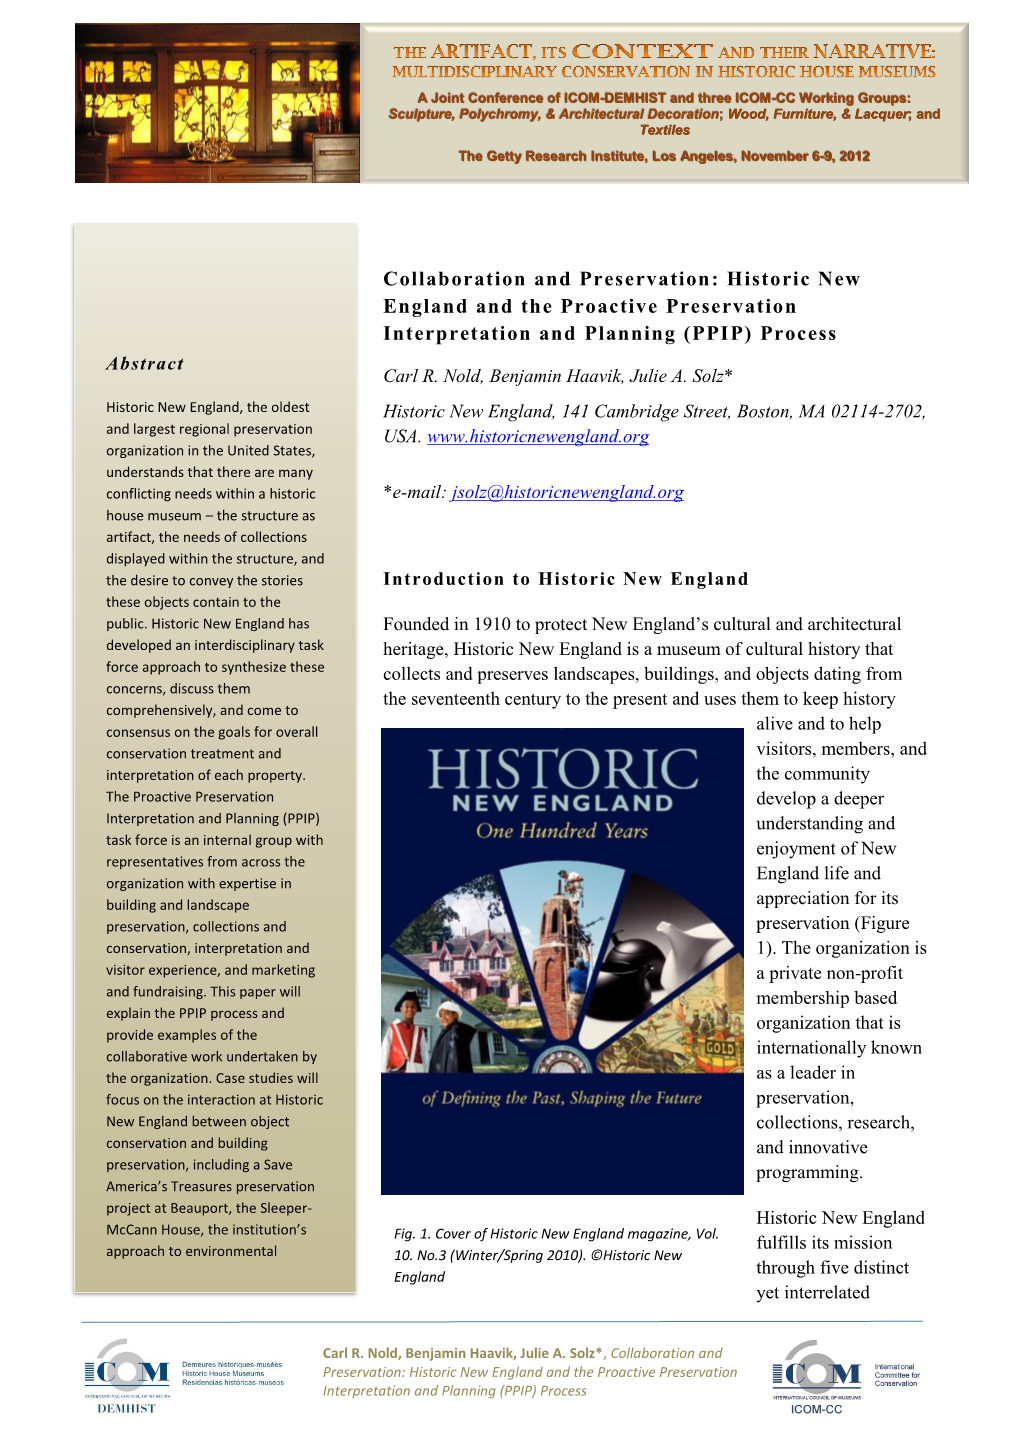 Historic New England and the Proactive Preservation Interpretation and Planning (PPIP) Process Abstract Carl R